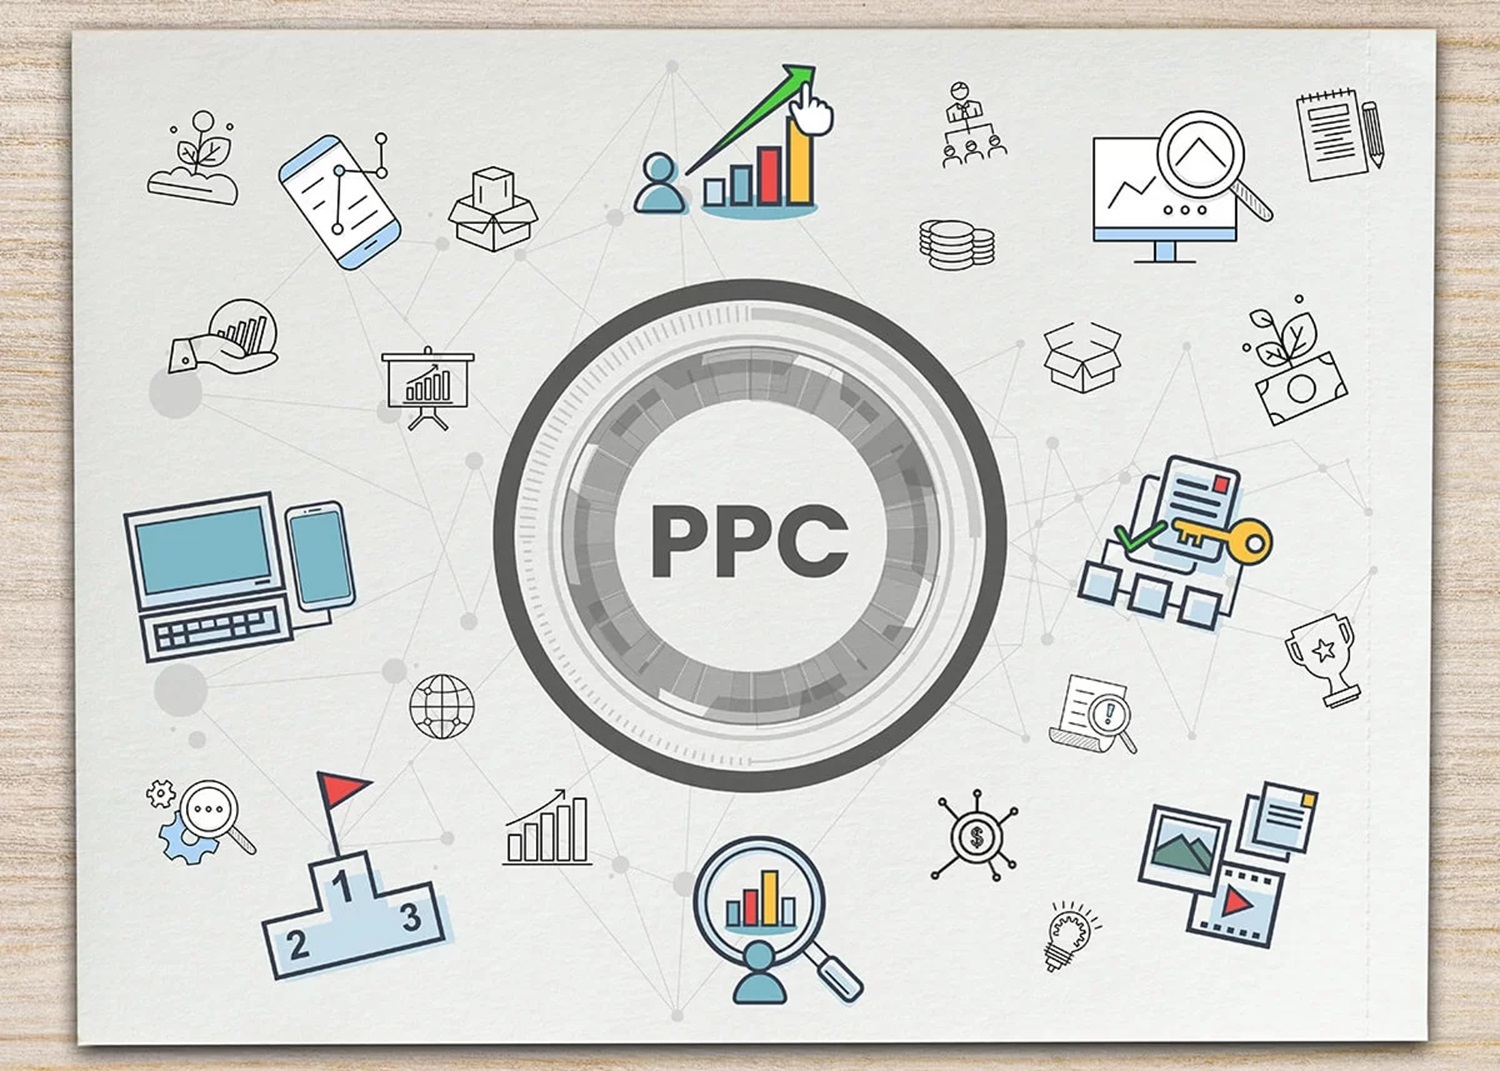 freelance ppc expert in delhi, freelance ppc expert advertising, ppc strategy development agencies, ppc consultant services, ppc expert, pay per click, ppc consultant, ppc strategy, ppc campaigns, ppc management, ppc specialist, ppc optimization, ppc specialist team, expert ppc services, ppc consulting, expert ppc management, proven ppc strategies, ppc solutions, ecommerce ppc, ppc specialists, mobile ppc optimization, ppc excellence, ppc consultation, comprehensive ppc solutions, ppc excellence hub, expert ppc management, ppc mastery, ppc performance analytics, social media ppc excellence, roi focused ppc management